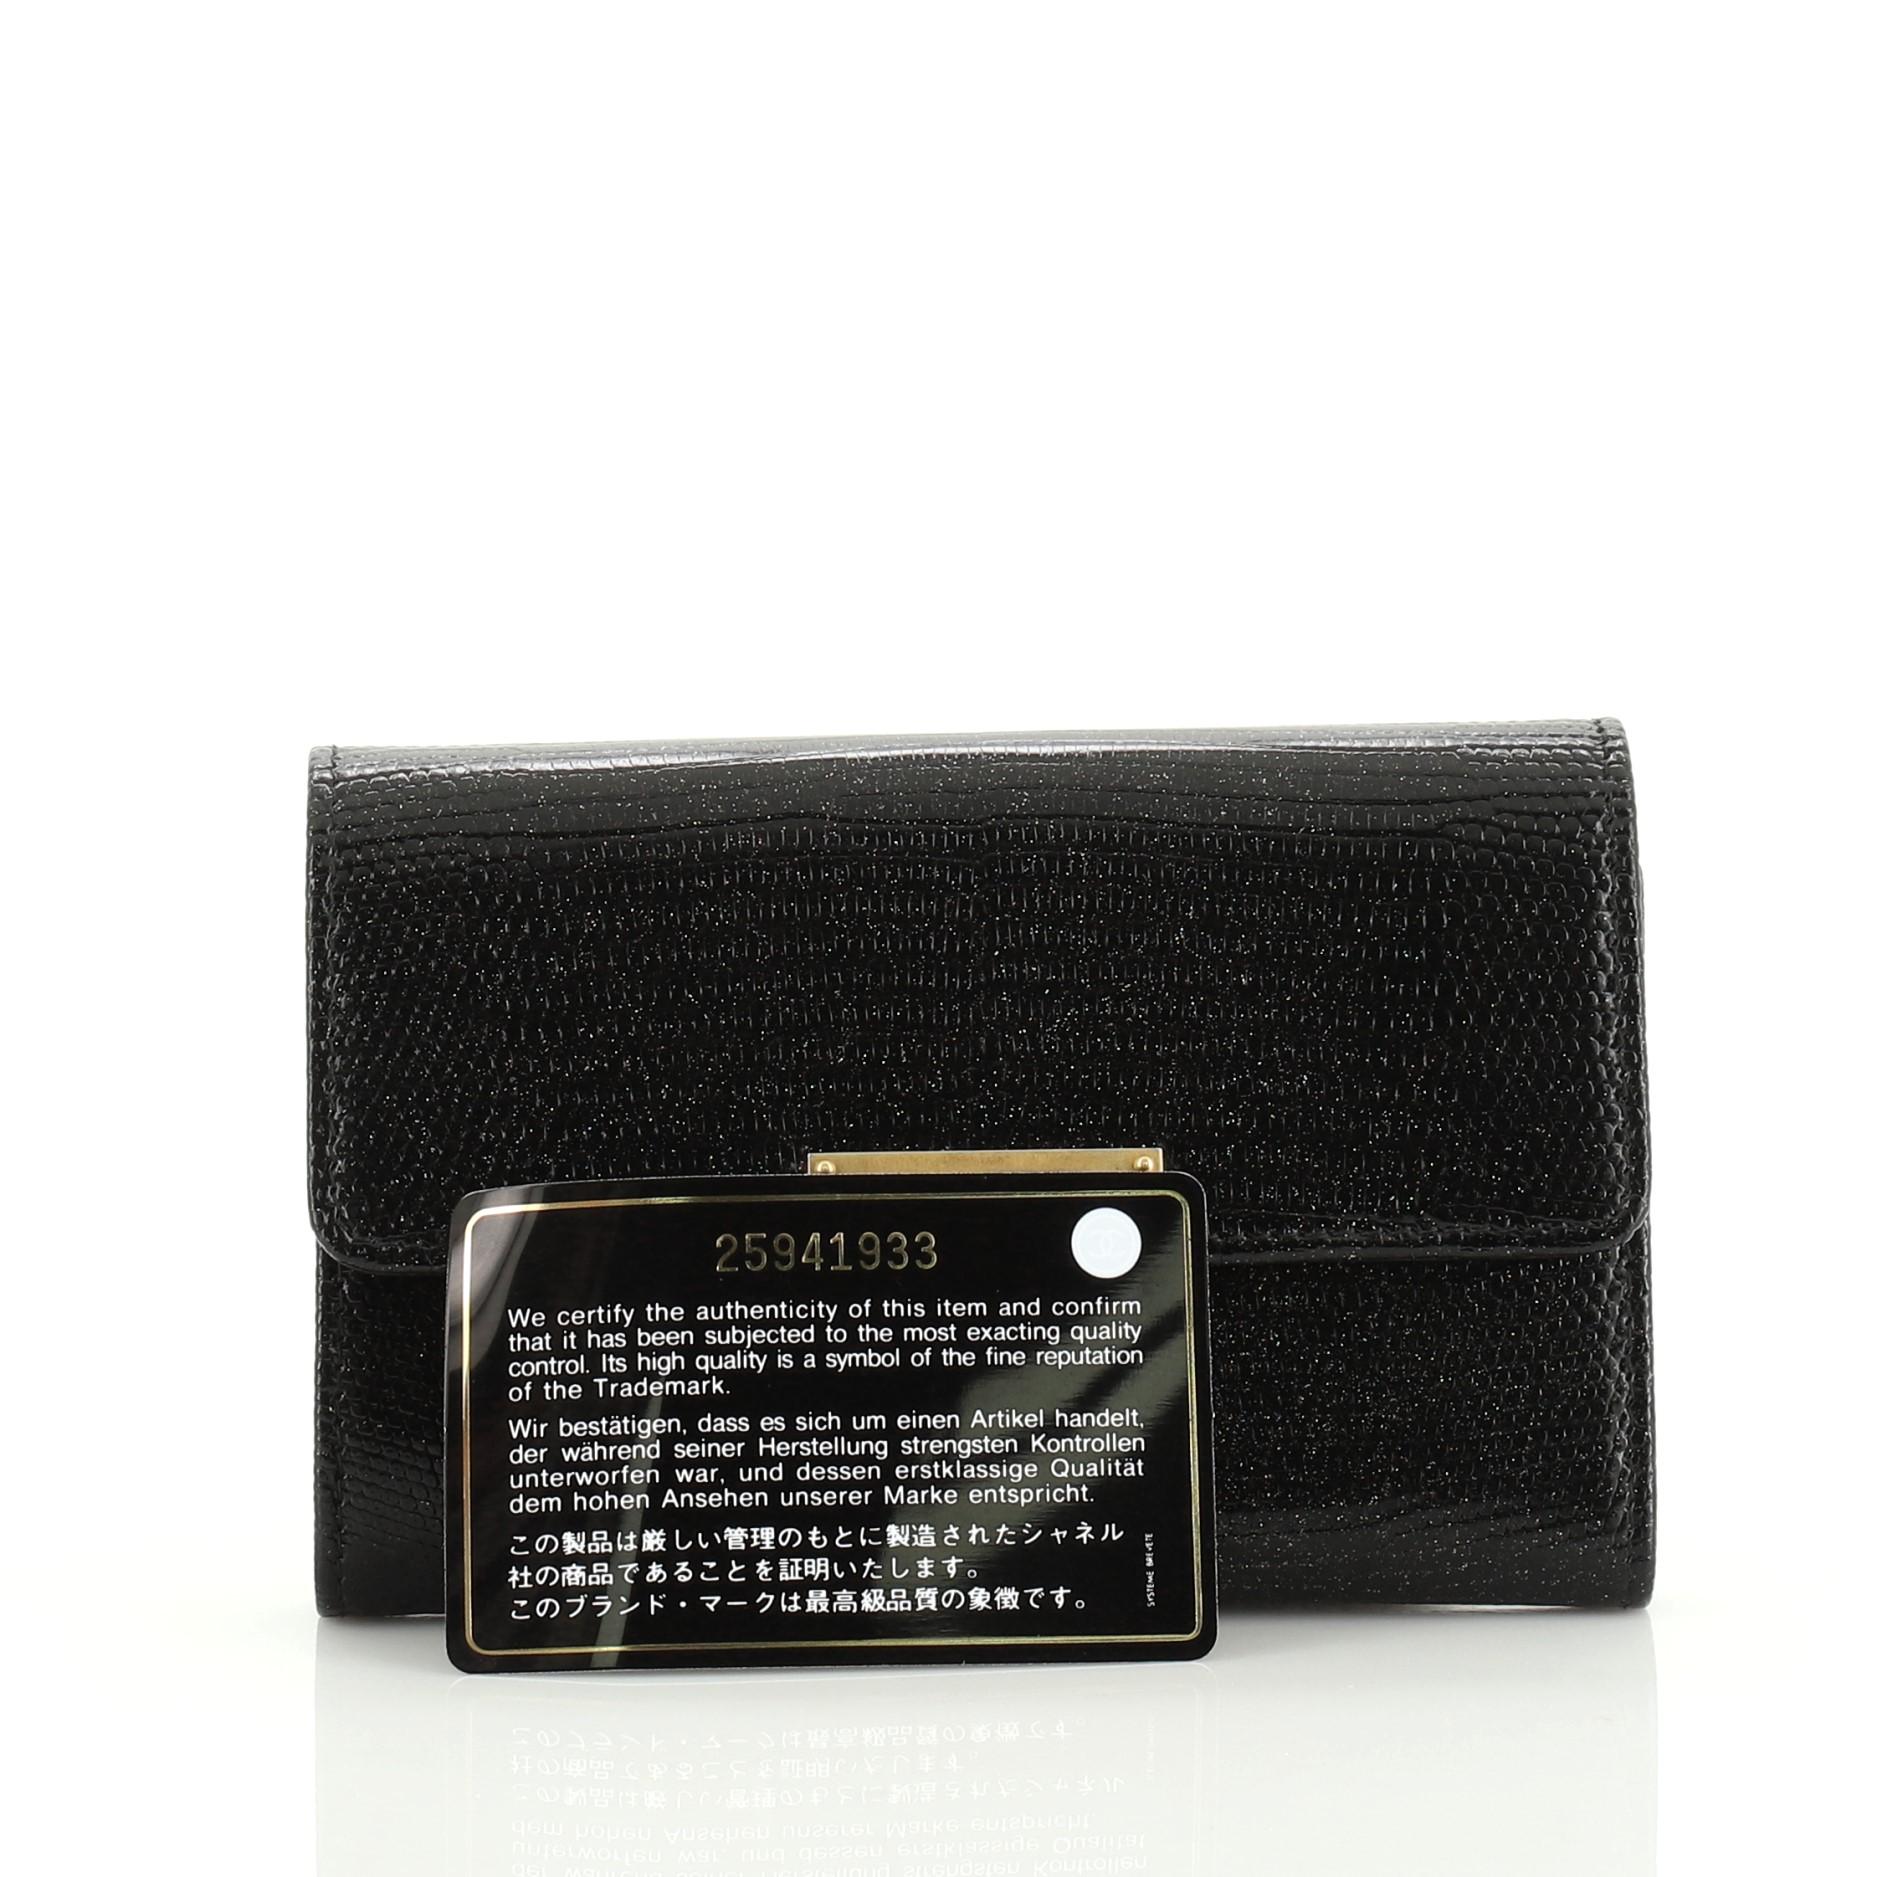 This Chanel Golden Class Wallet Lizard Small, crafted in genuine black and multicolor lizard, features gold-tone hardware. Its CC flip clasp closure opens to a black leather interior with zip pocket and multiple card slots. Hologram sticker reads: